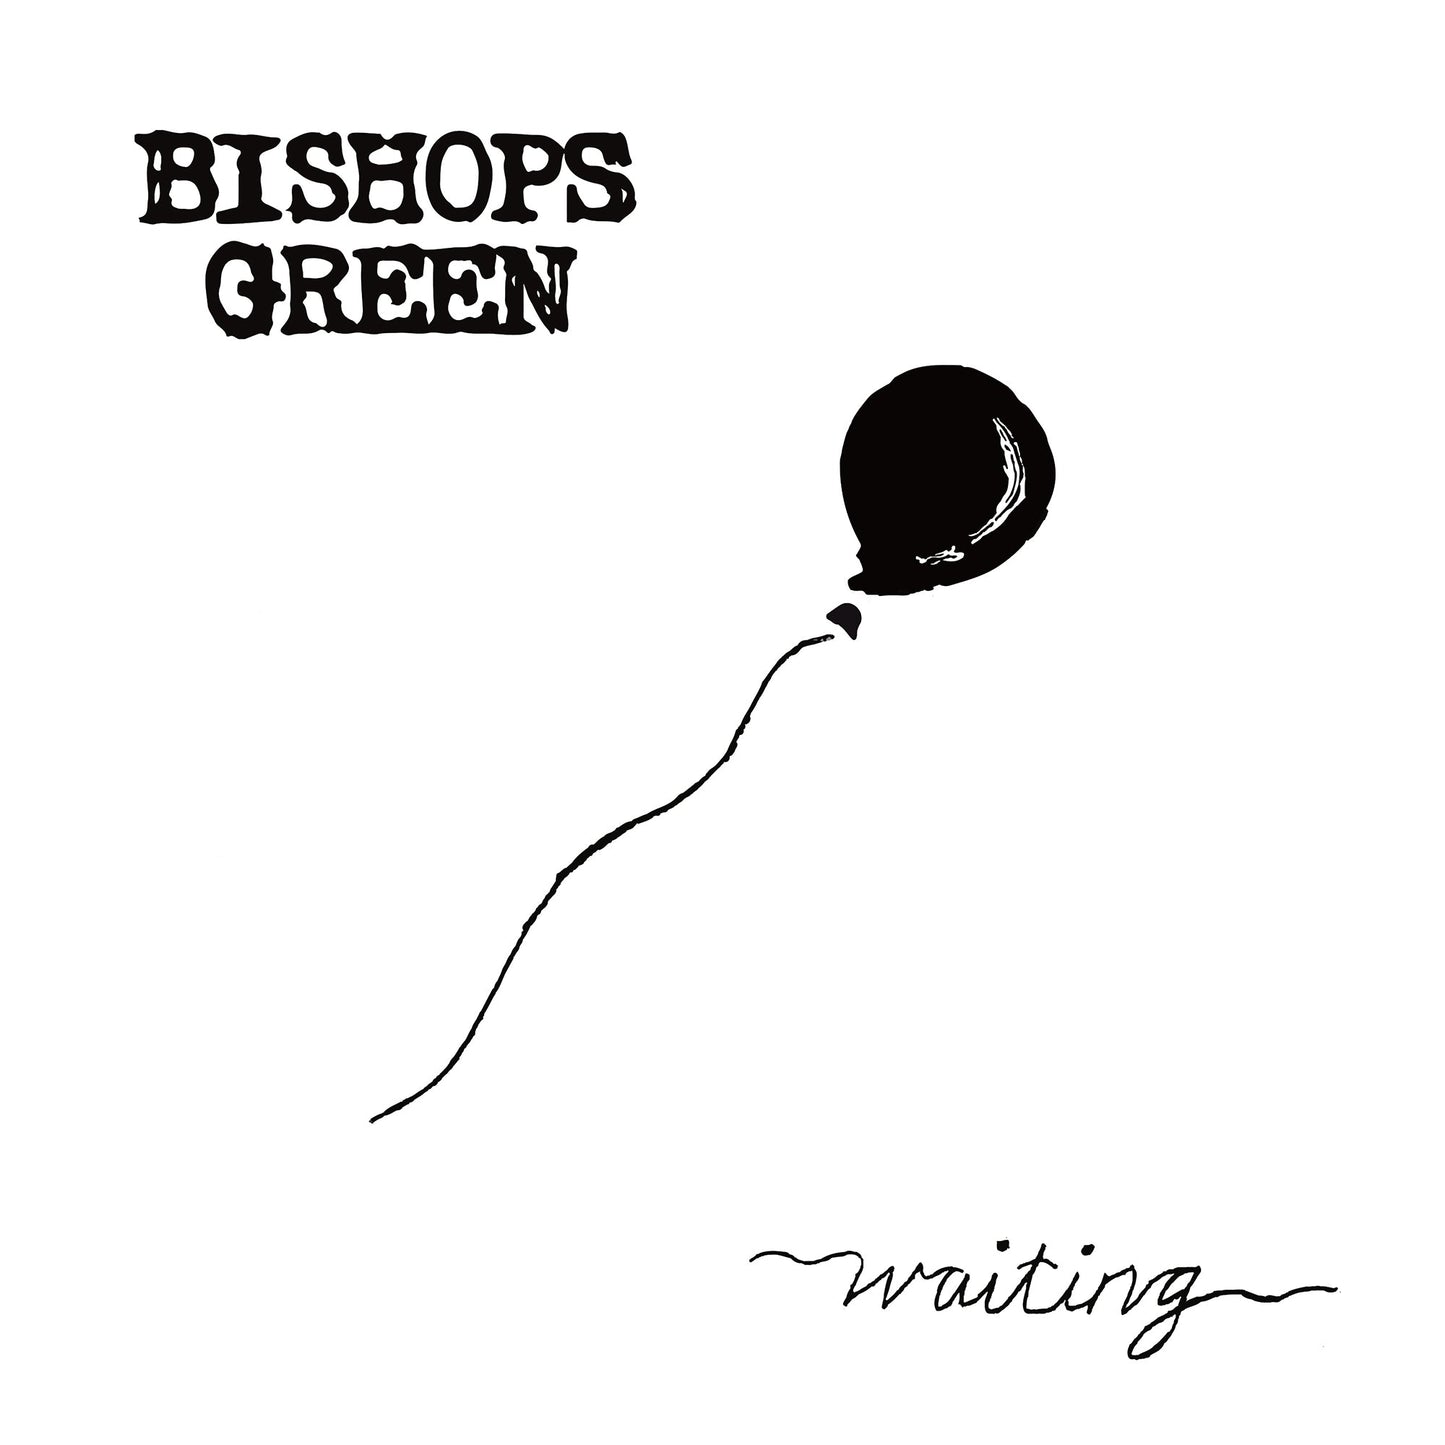 Bishops Green - "Waiting" LP (Clear and Black Galaxy)